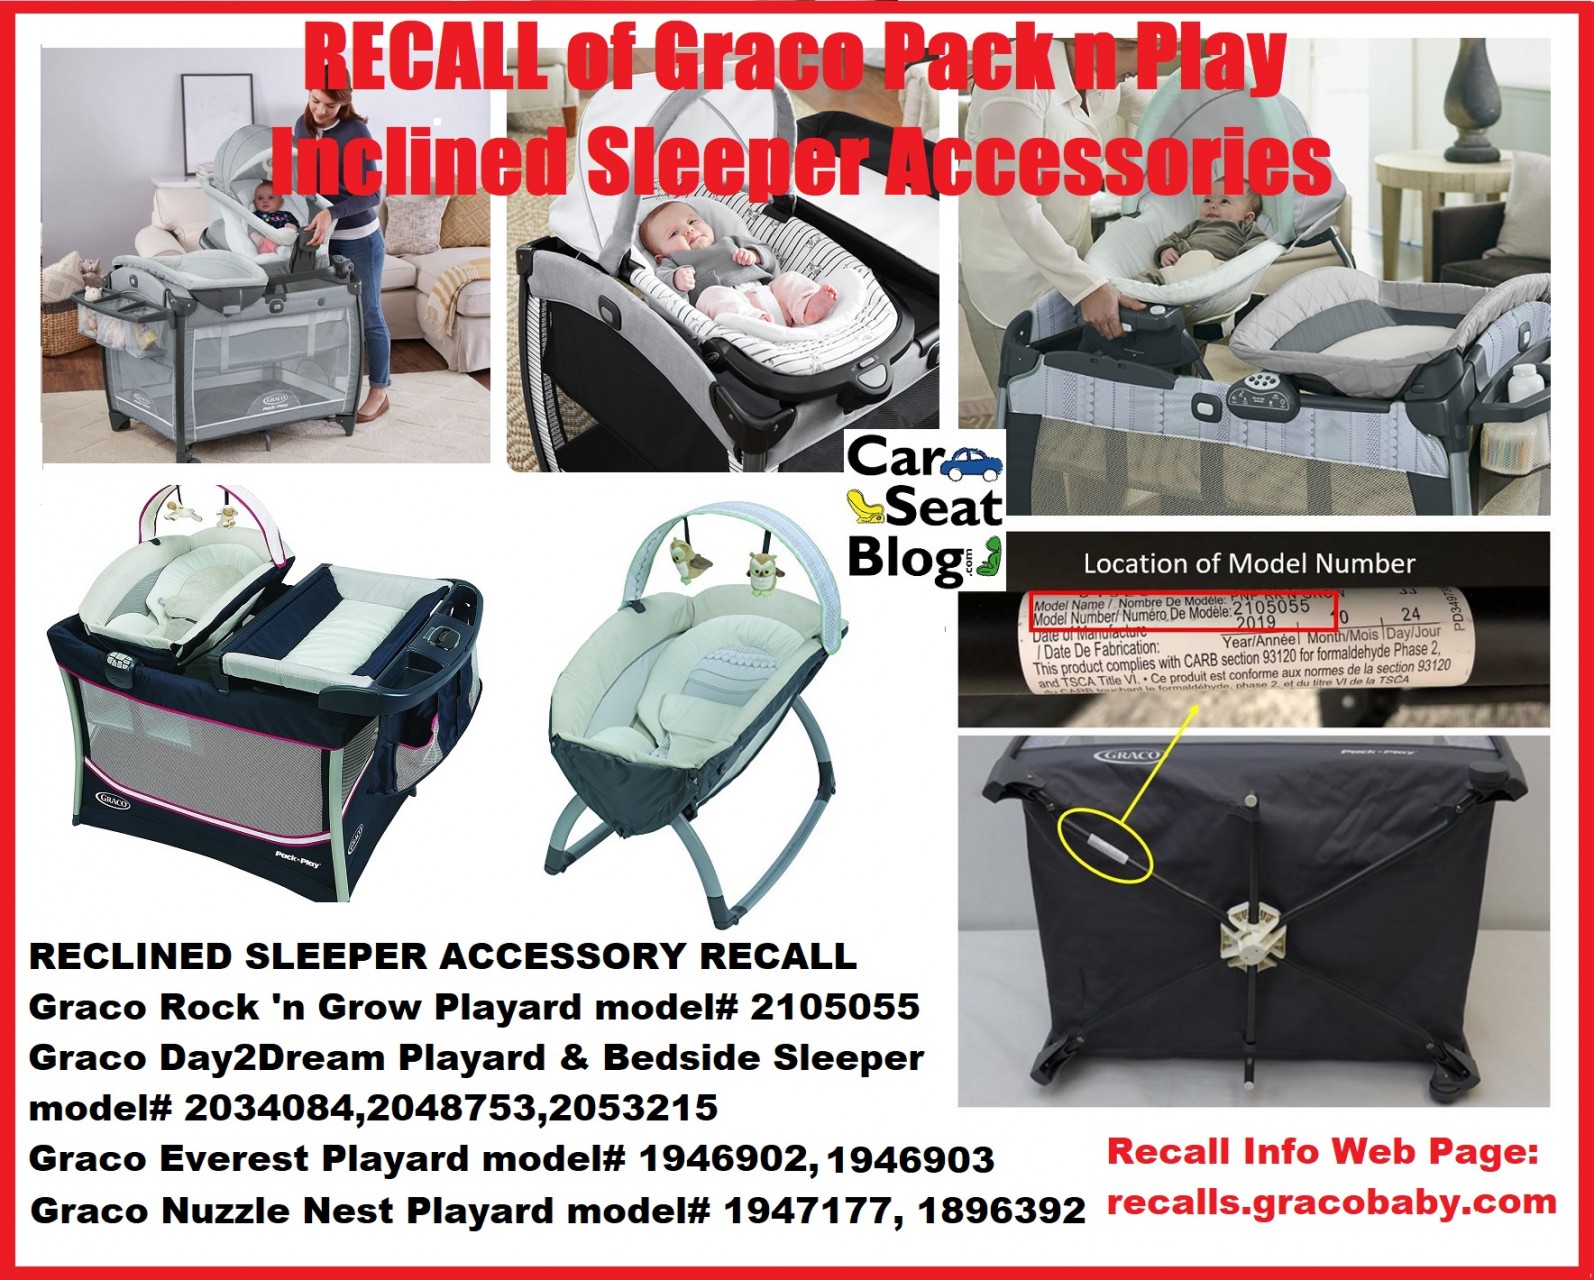 https://carseatblog.com/wp-content/uploads/2020/12/Graco-pack-n-play-recall-graphic-1.jpg